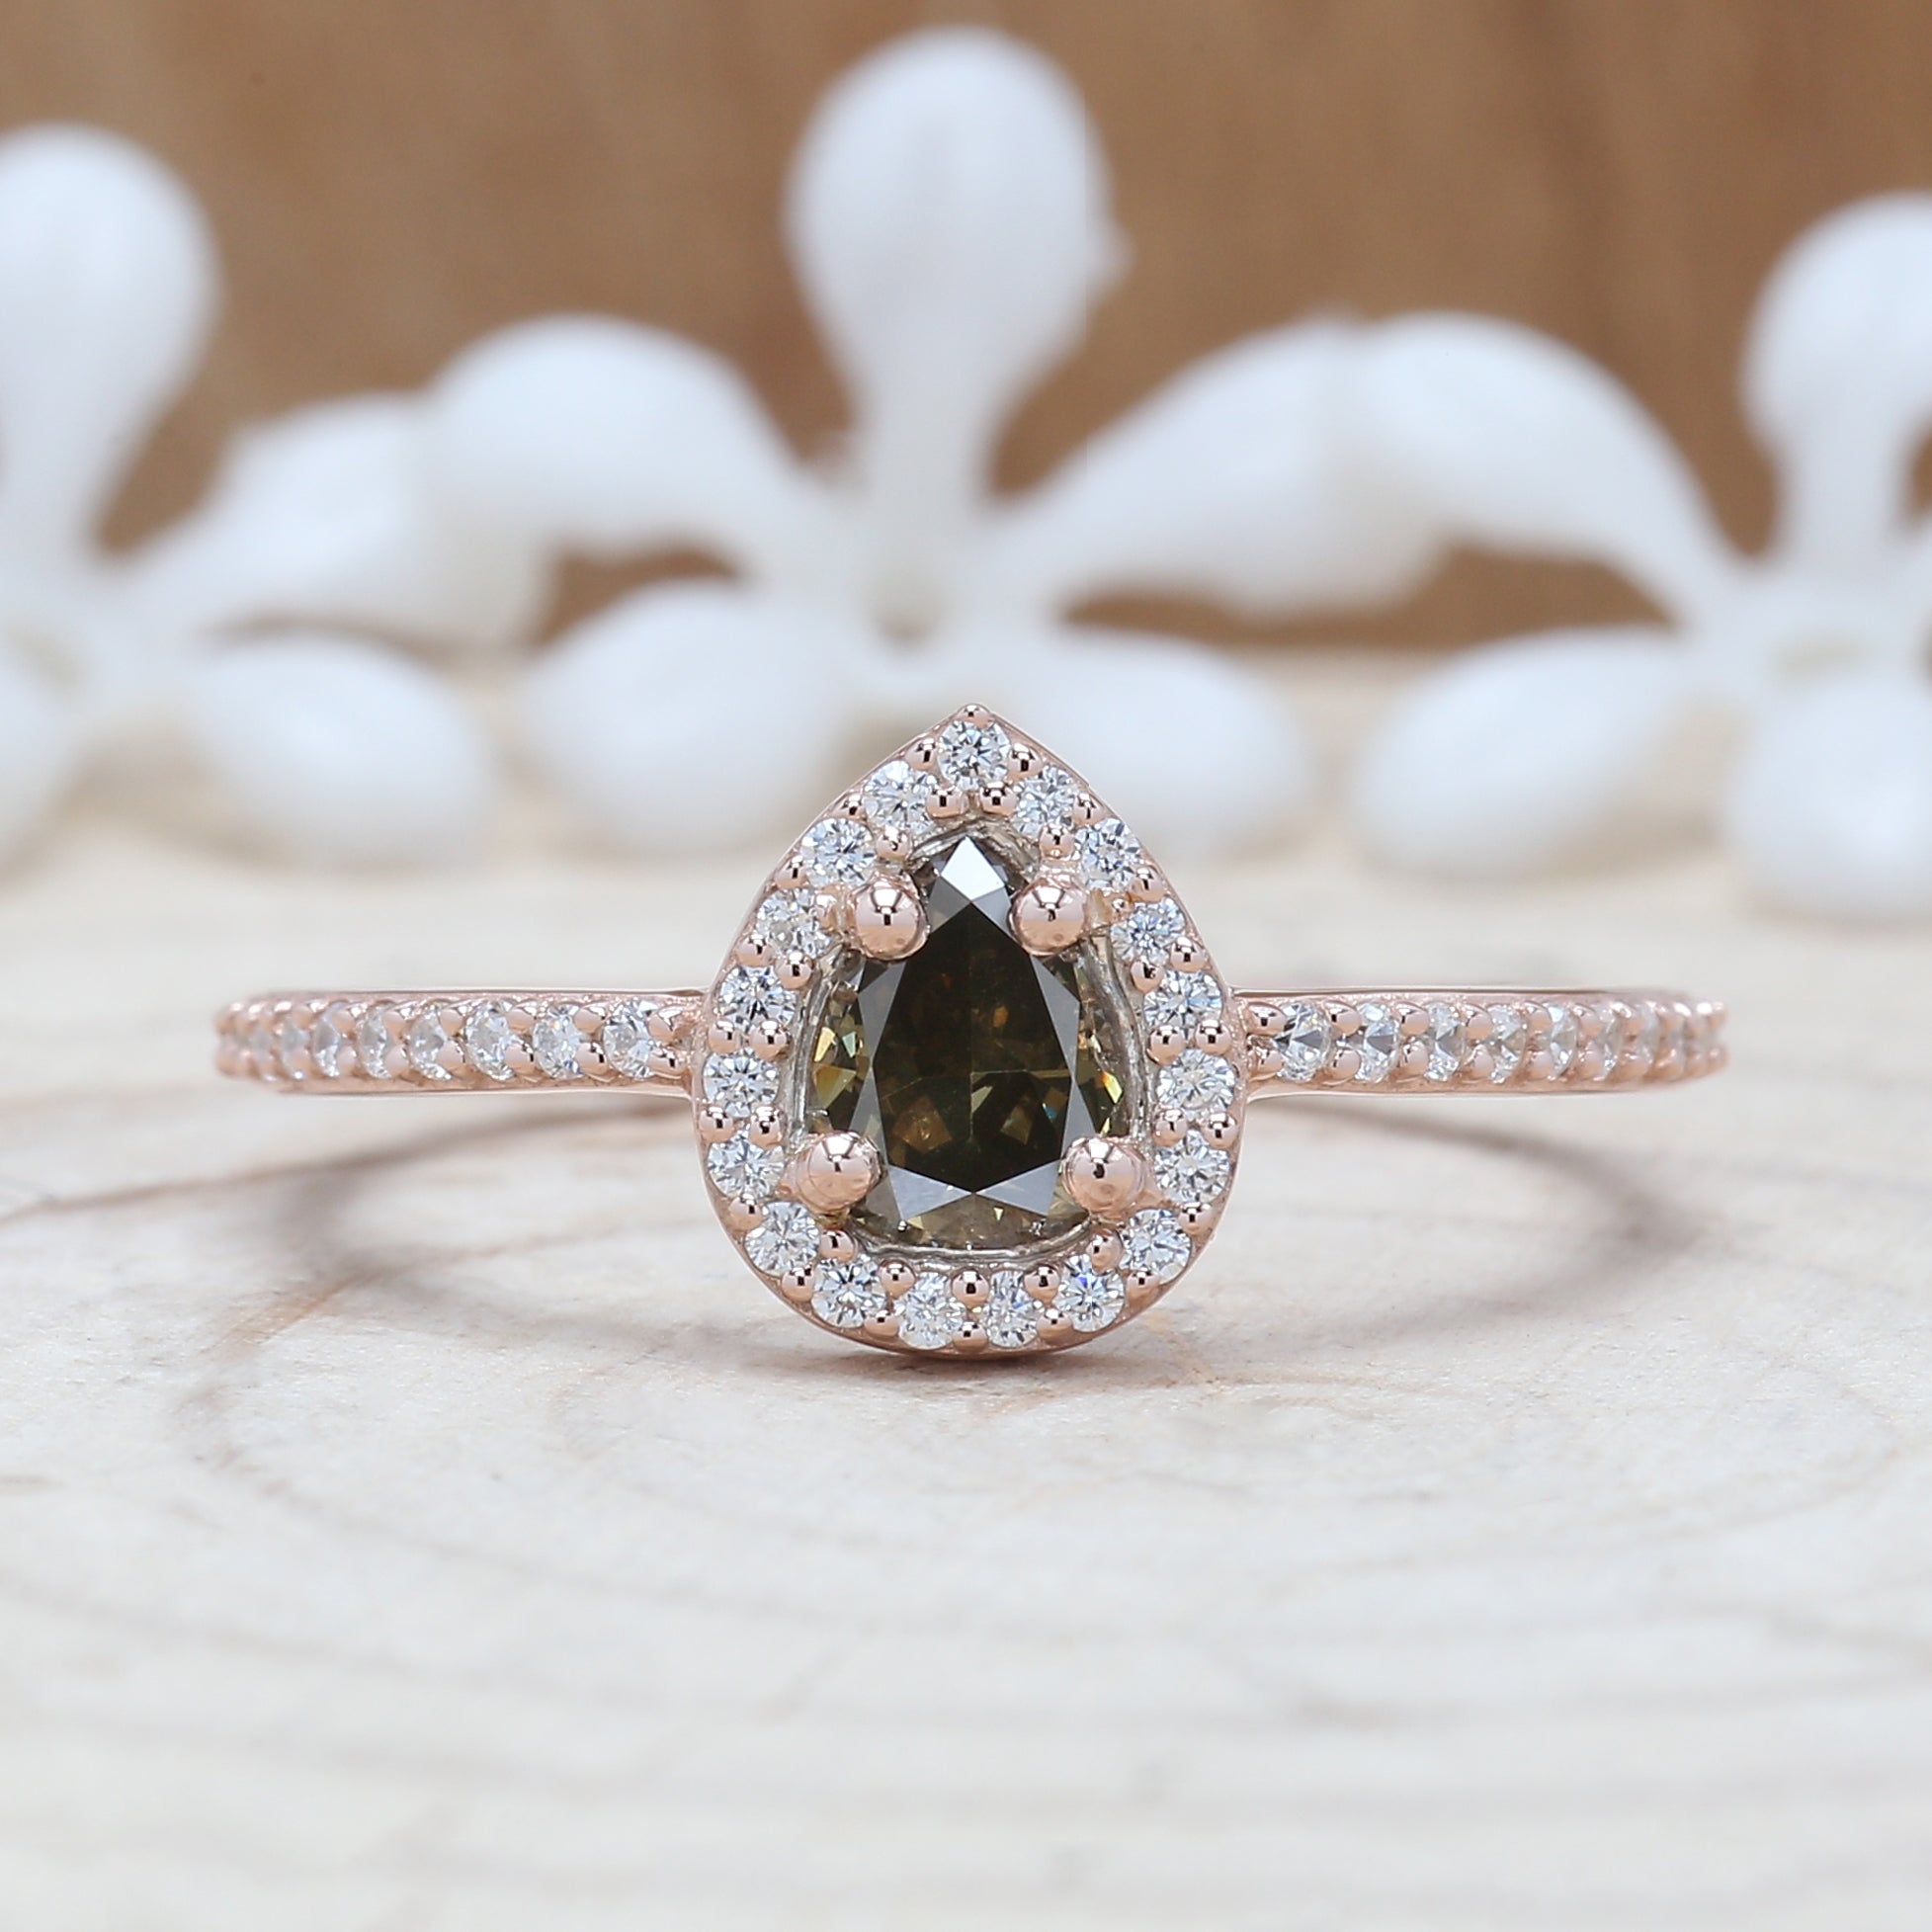 Pear Cut Green Color Diamond Ring 0.37 Ct 5.45 MM Pear Shape Diamond Ring 14K Solid Rose Gold Silver Engagement Ring Gift For Her QL5135